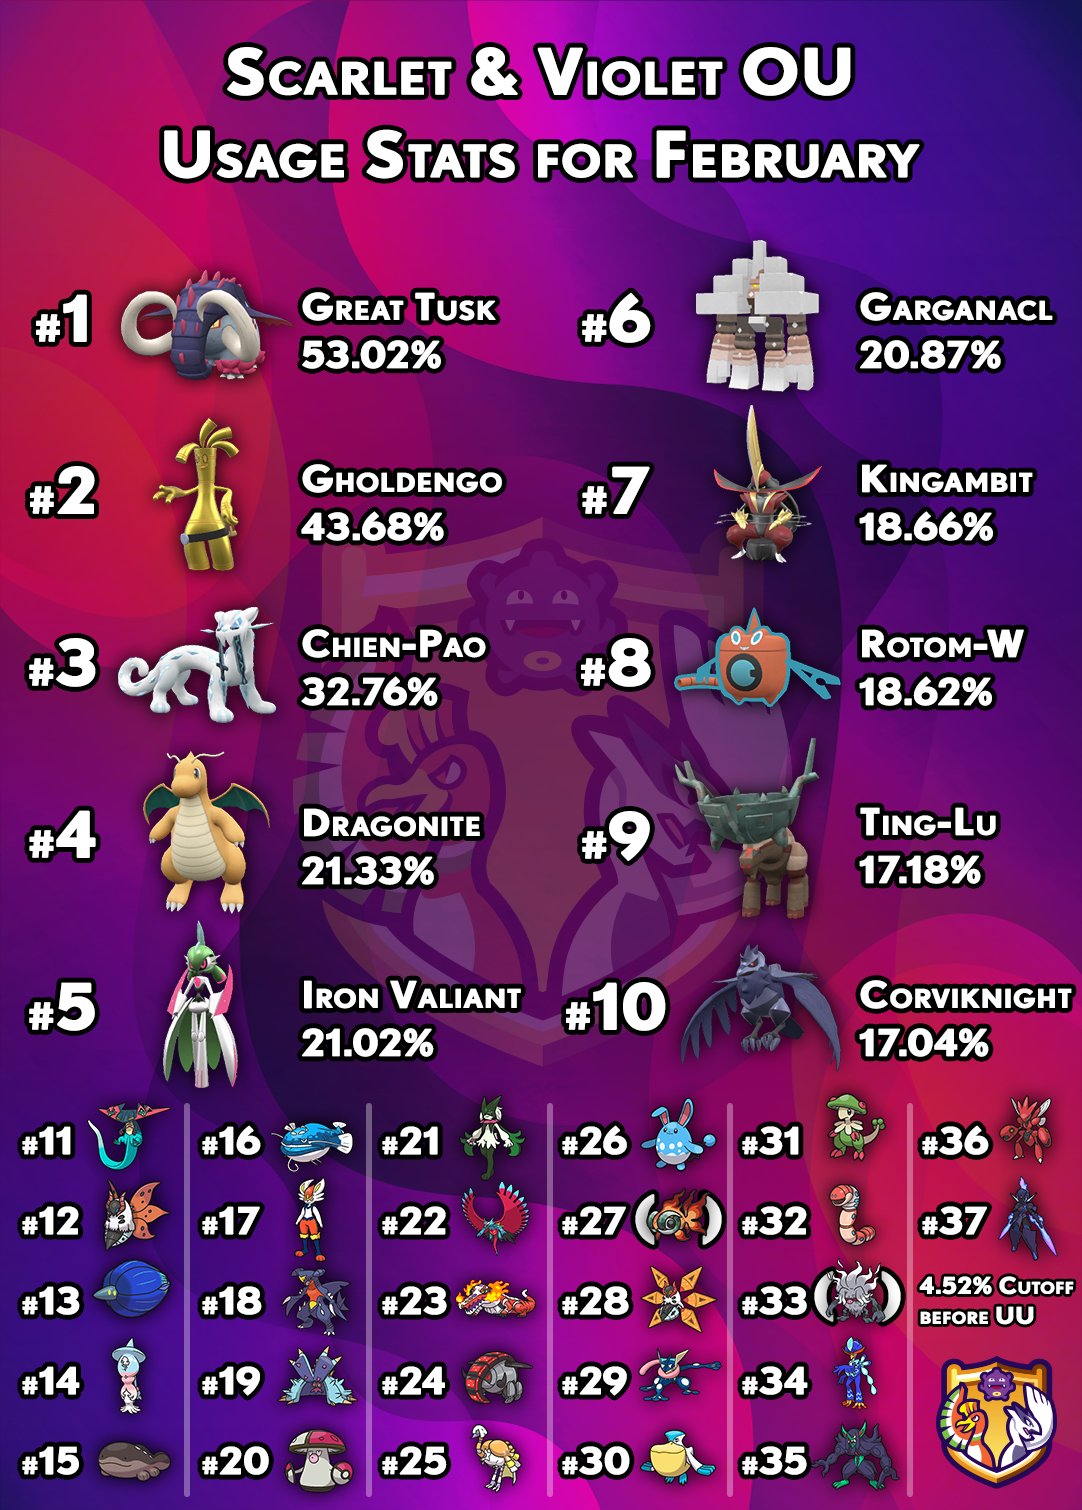 Smogon University on X: Whether it's a Dragon Dance sweeper or a reliable  Defogger, Salamence stays number one in UU! Explore more Pokemon Showdown  usage stats here:   / X